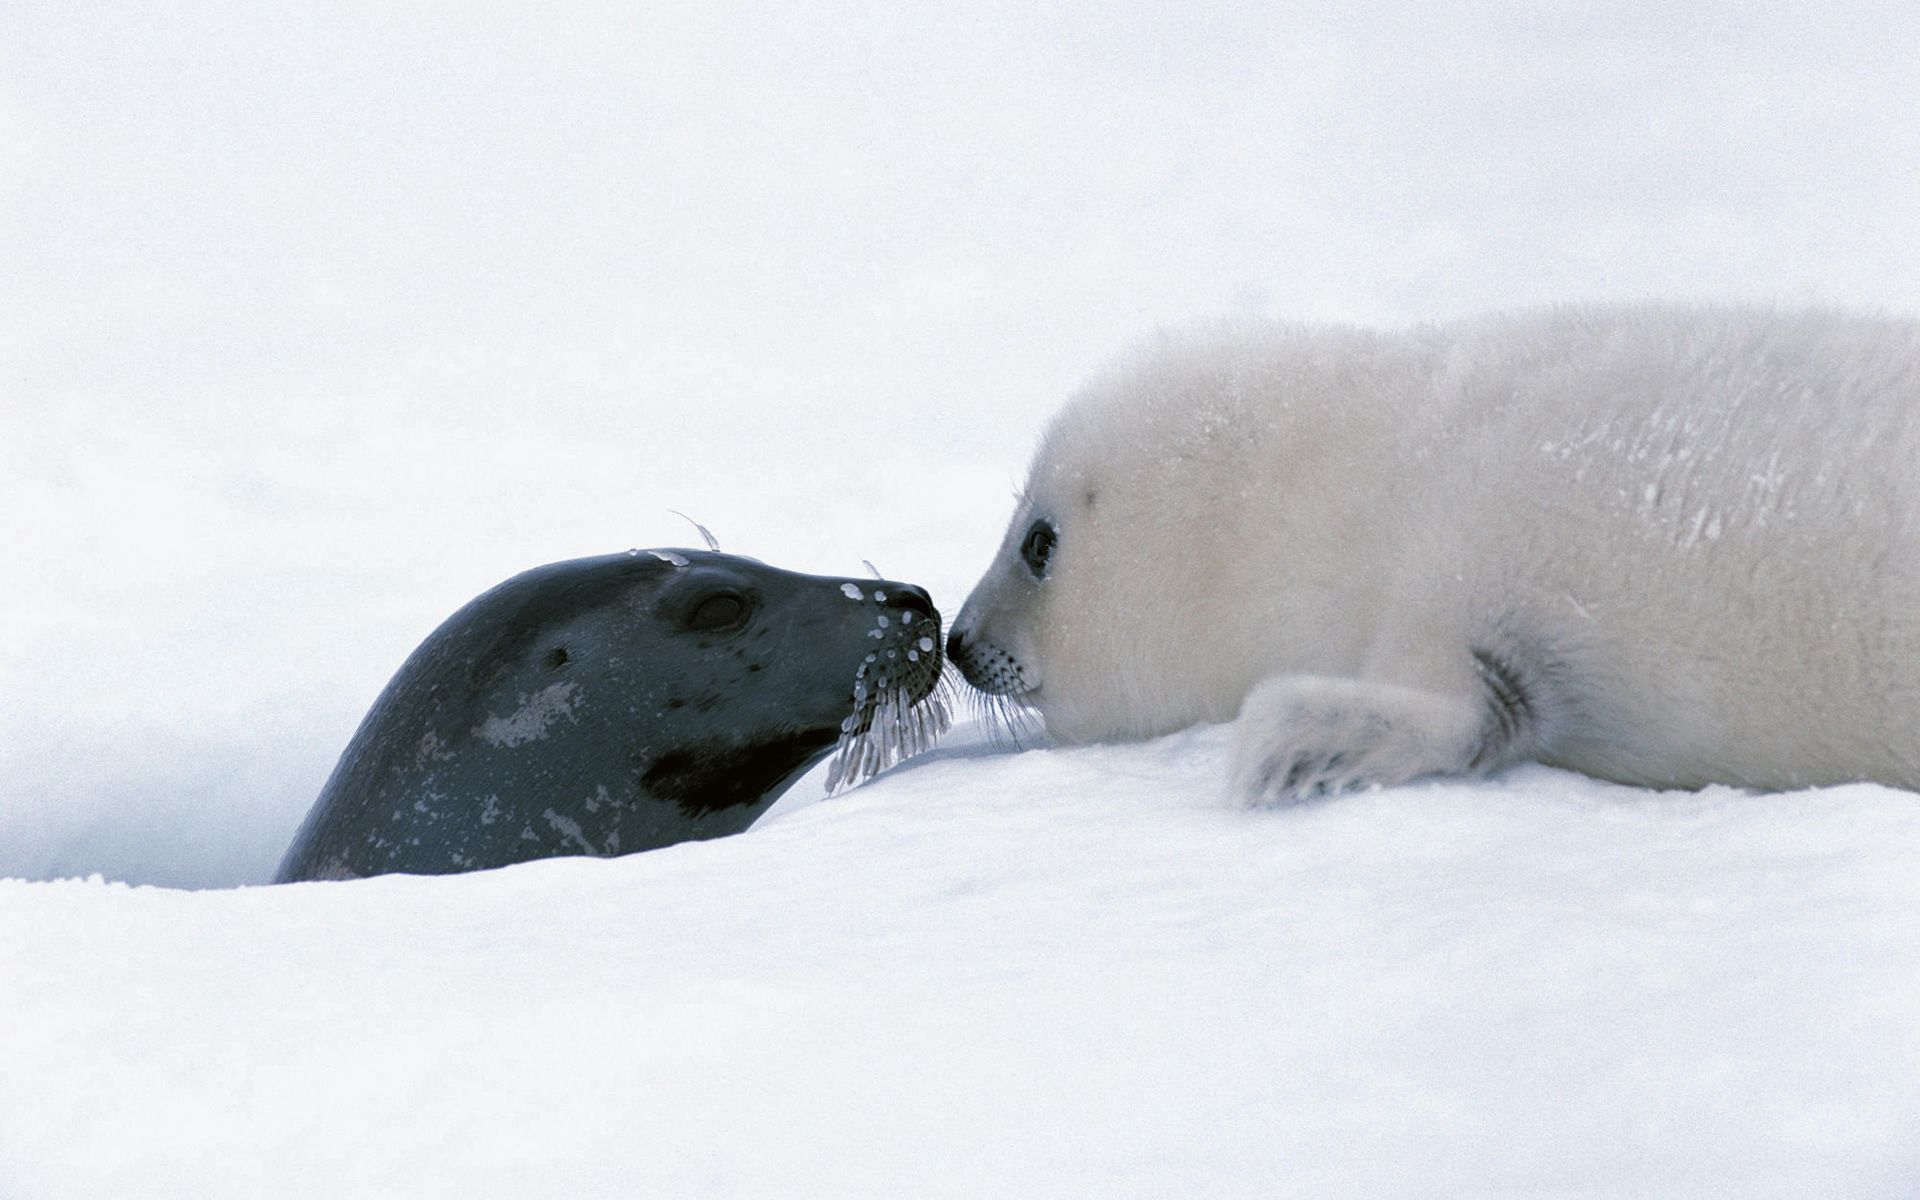 couple, animals, snow, pair, head, care, tenderness, seal